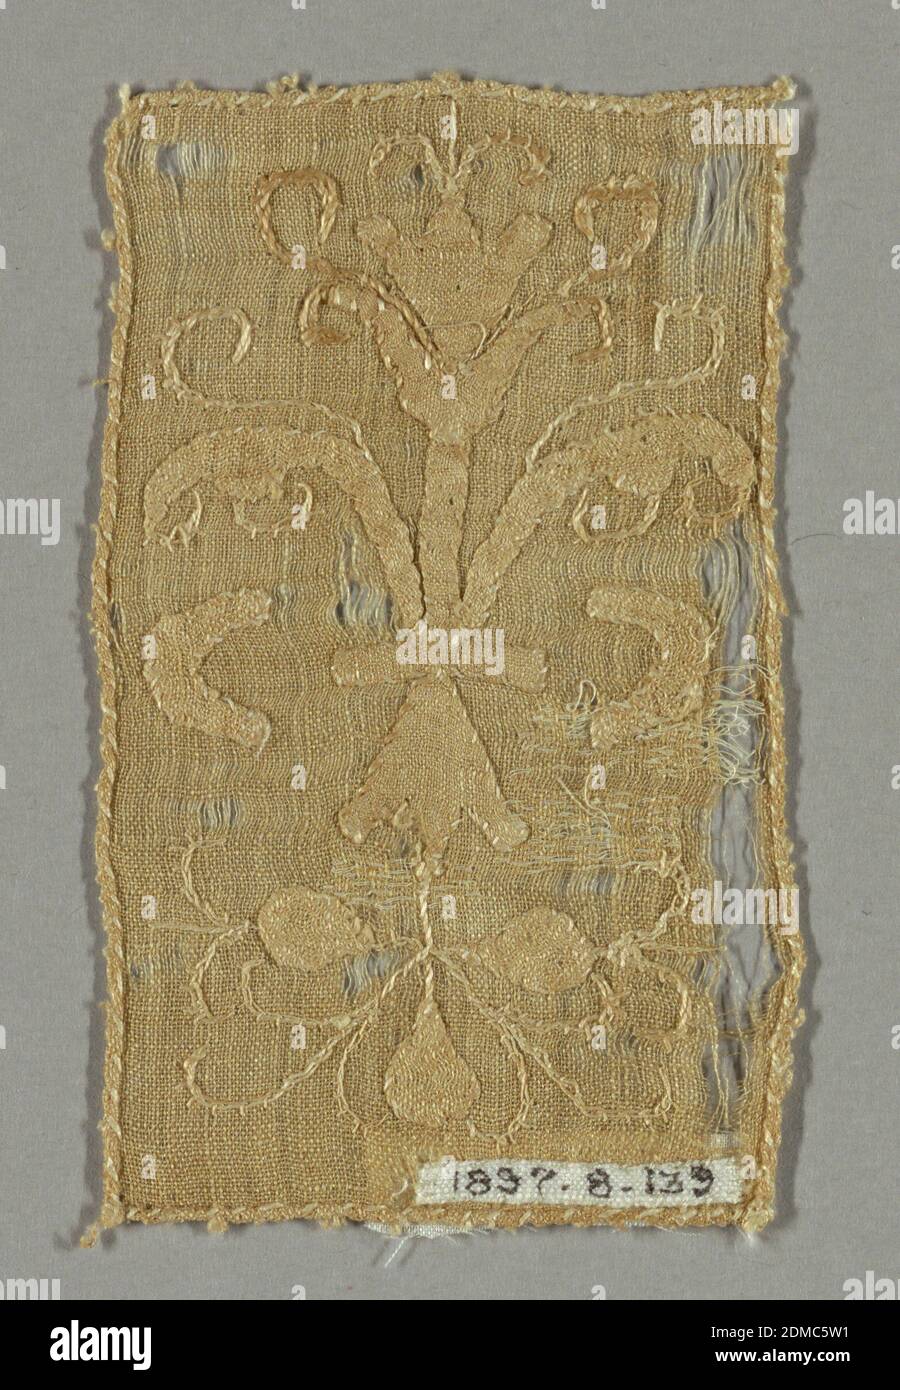 Fragment, Medium: linen Technique: applique and embroidery, Light brown rectangular fragment in a conventionalized design of scrolling leaves and floral forms., Belgium or France, early 17th century, embroidery & stitching, Fragment Stock Photo